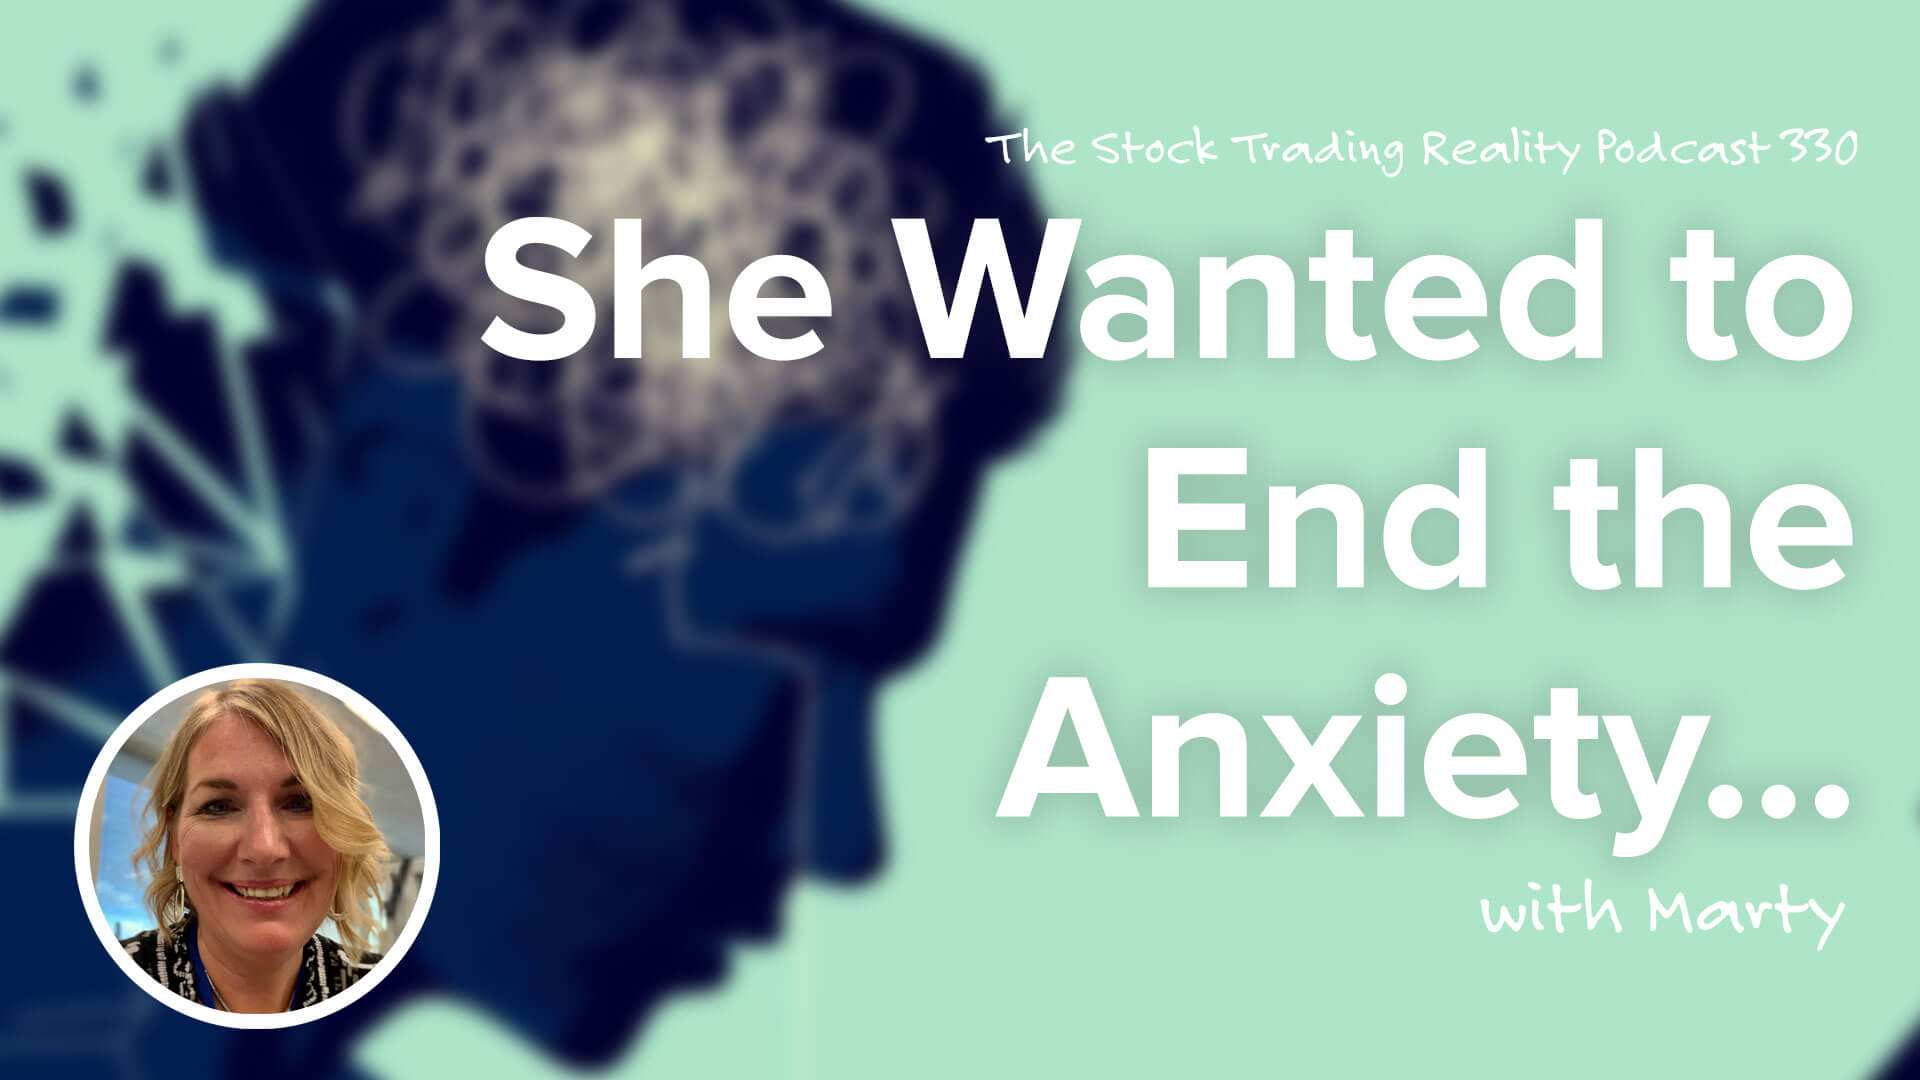 She Wanted to End the Anxiety | STR 330